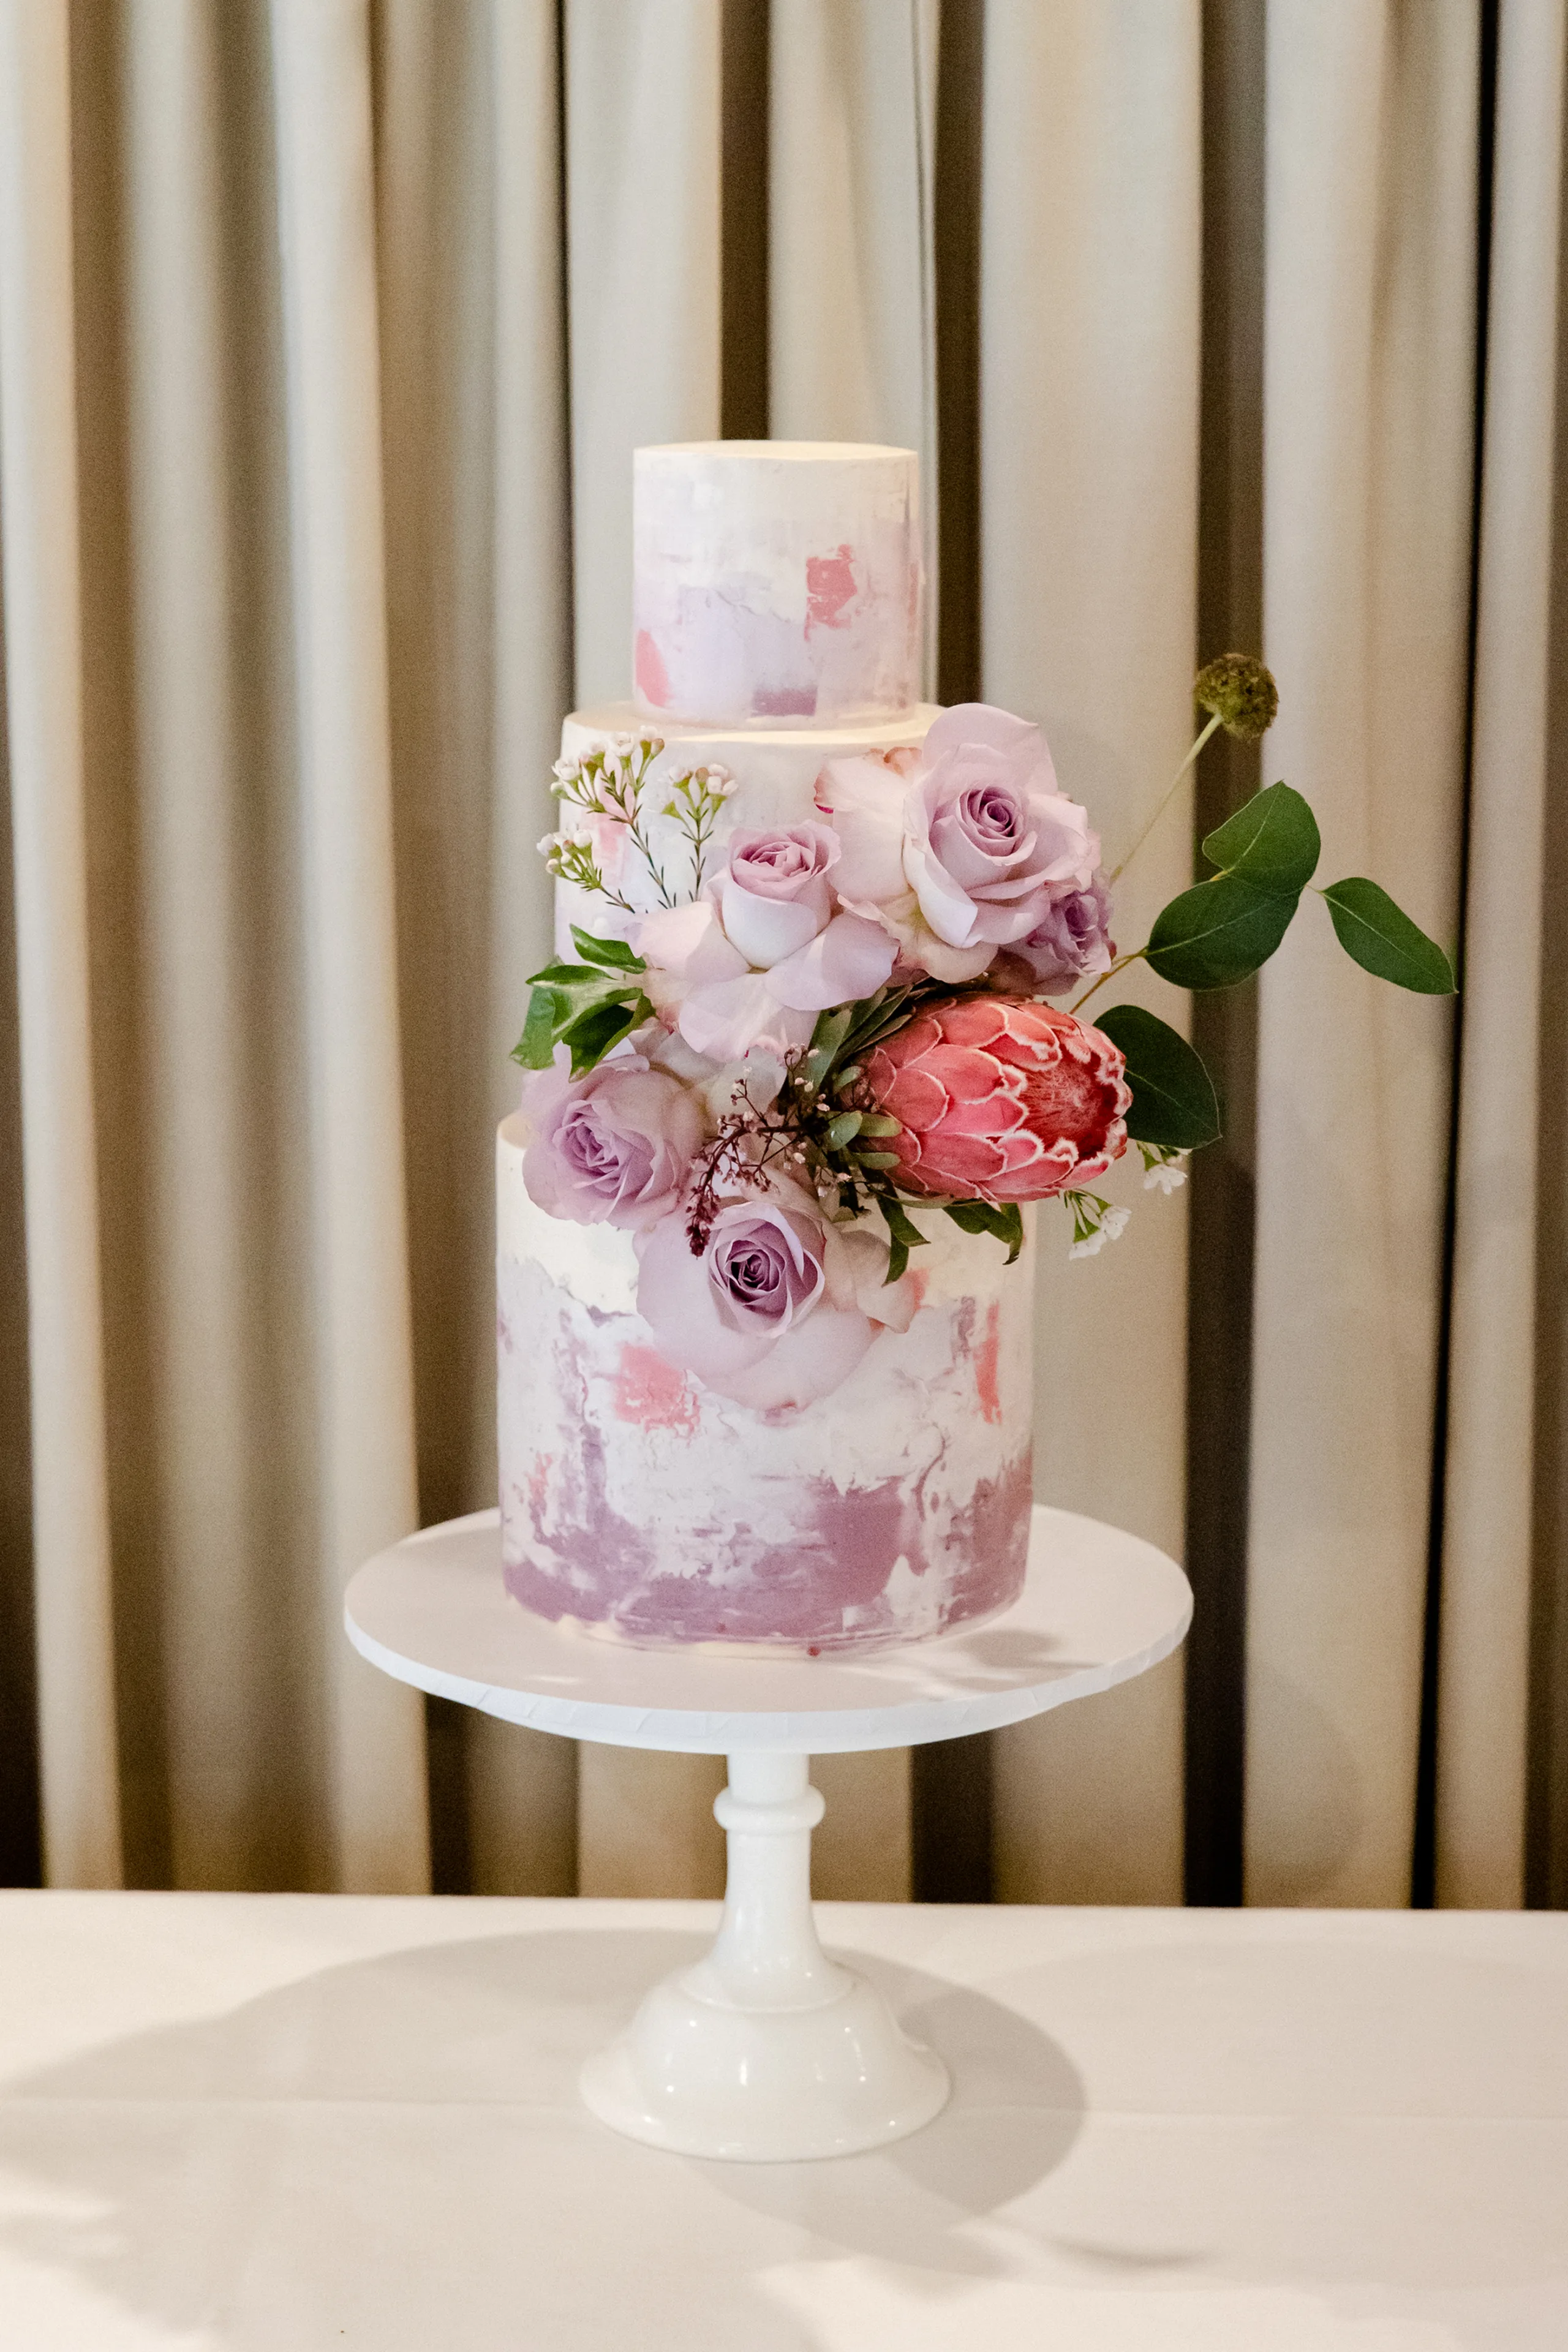 Tree tier wedding cake in Mauve watercolour and floral arrangement with Protea flower and roses